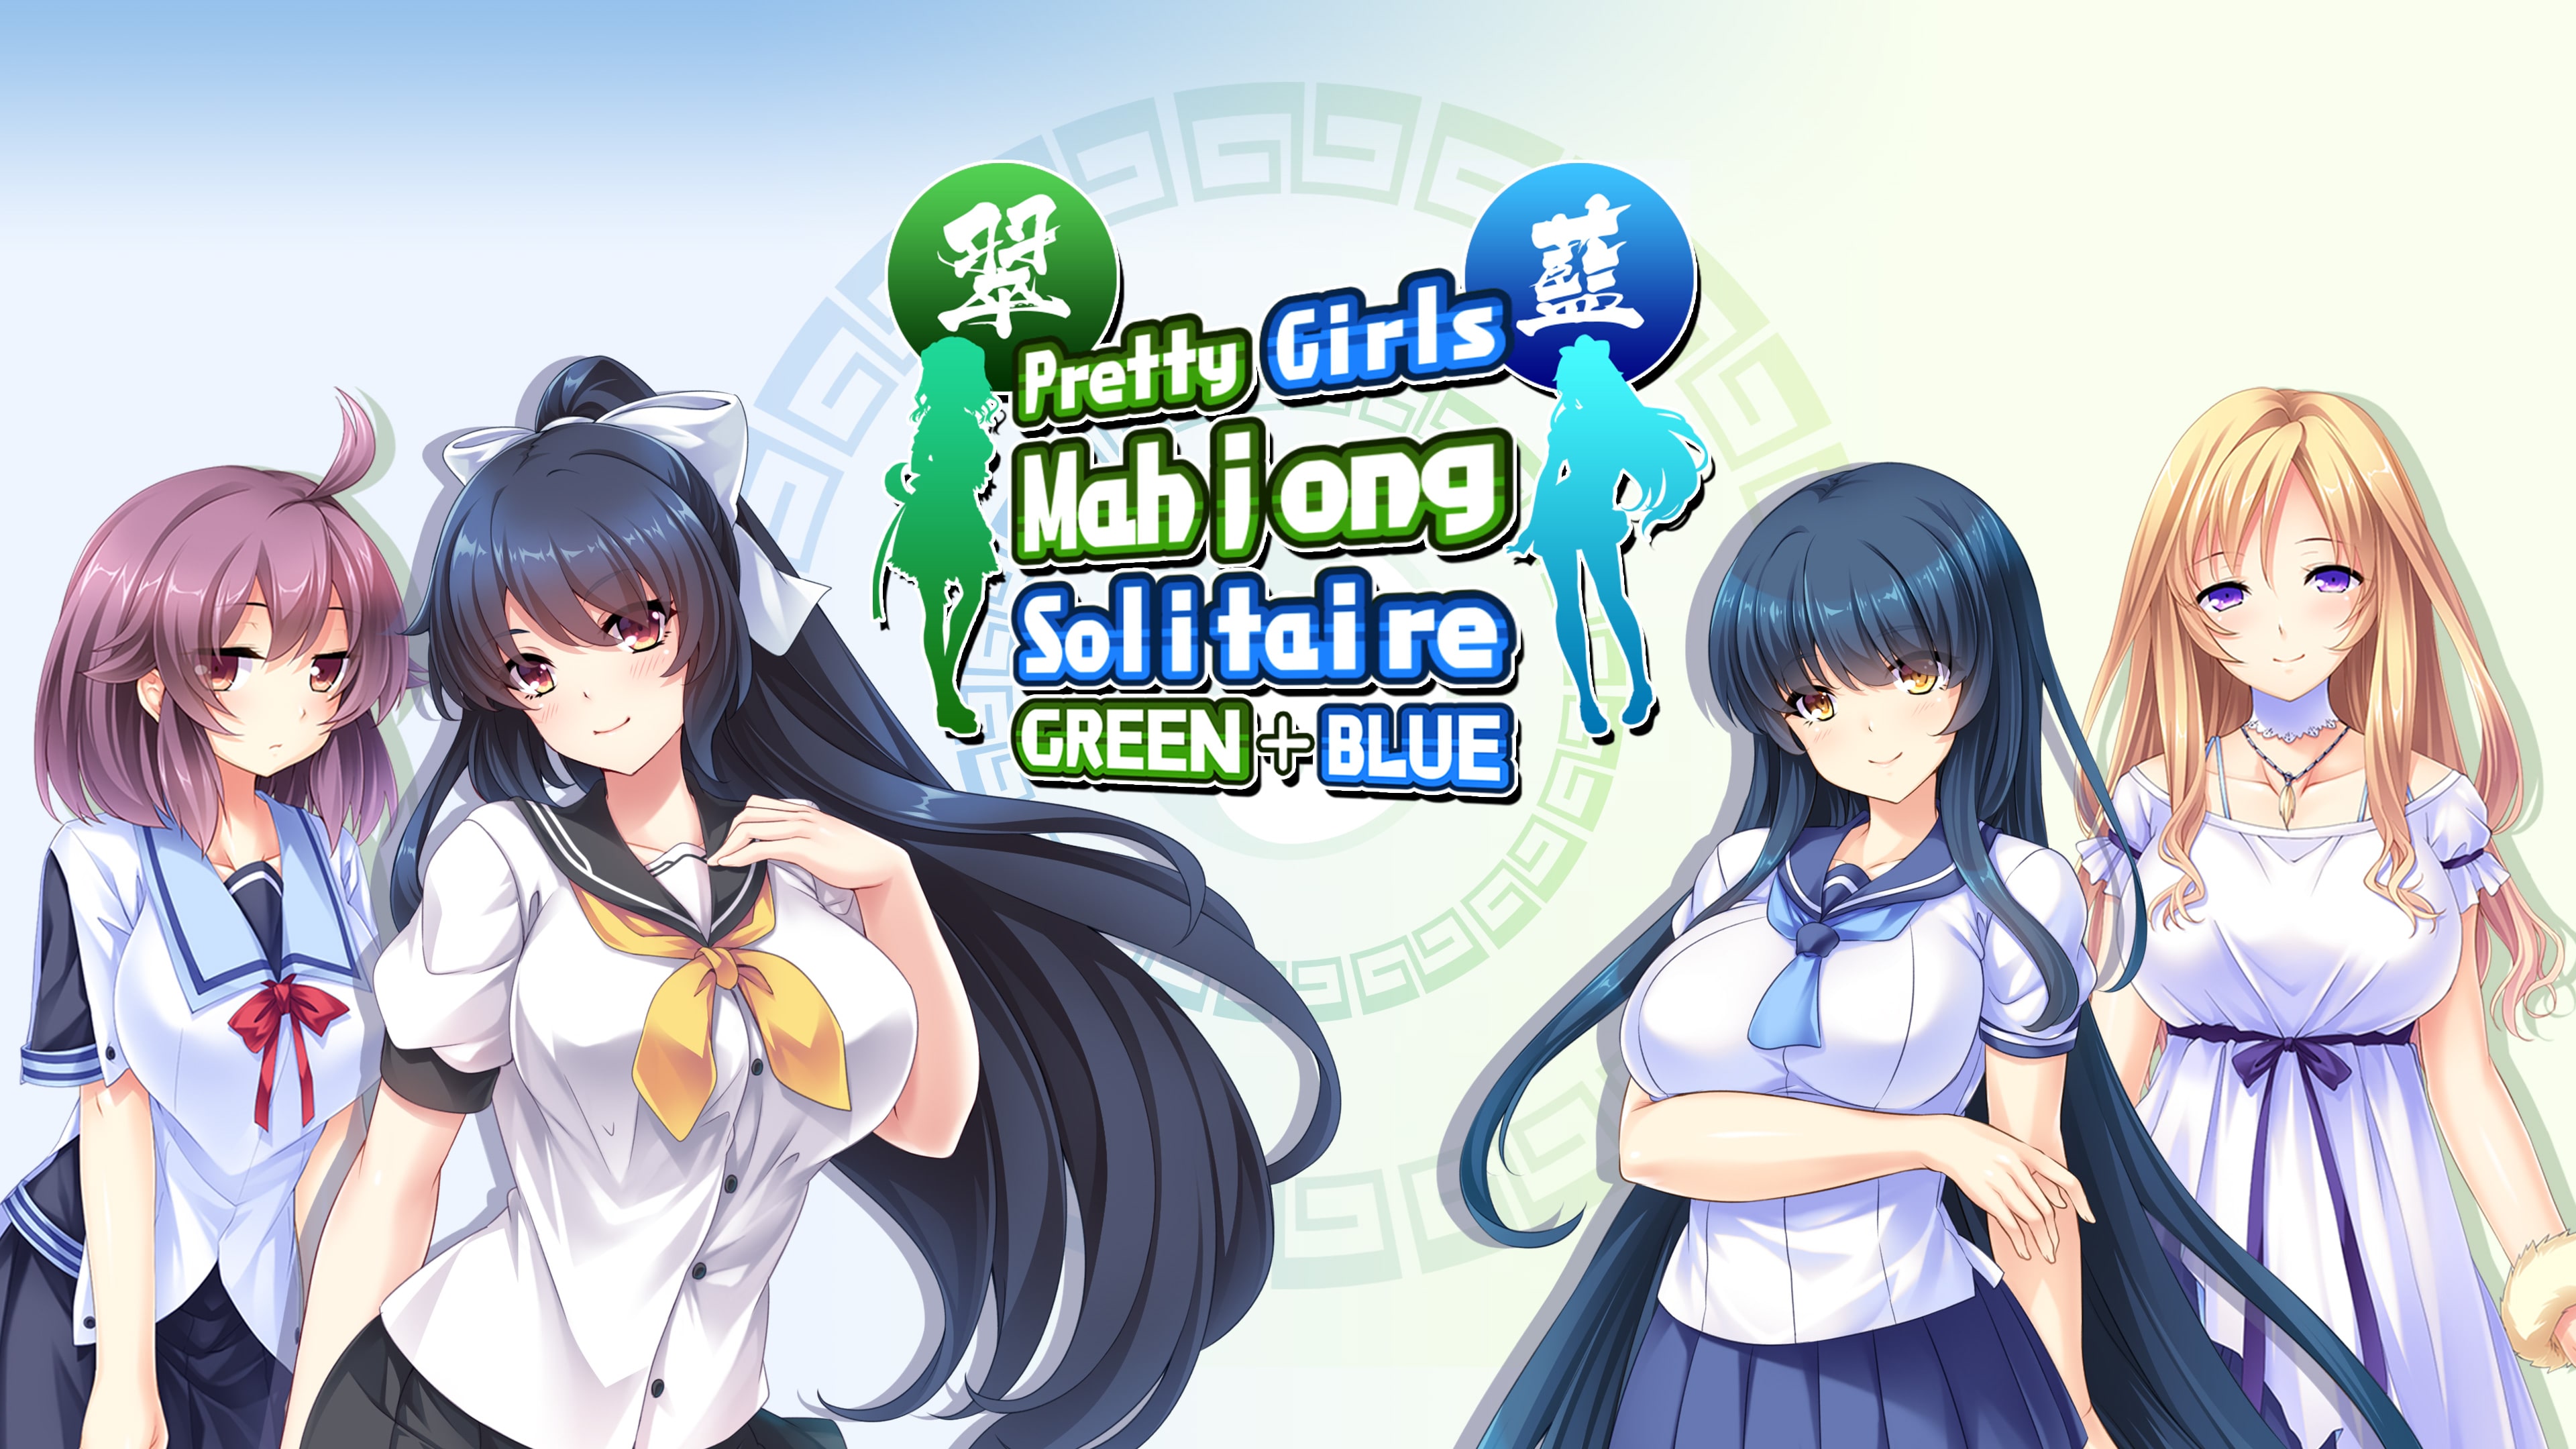 The Pretty Girls Mahjong Solitaire Green + Blue バンドル 【PS4 & PS5】